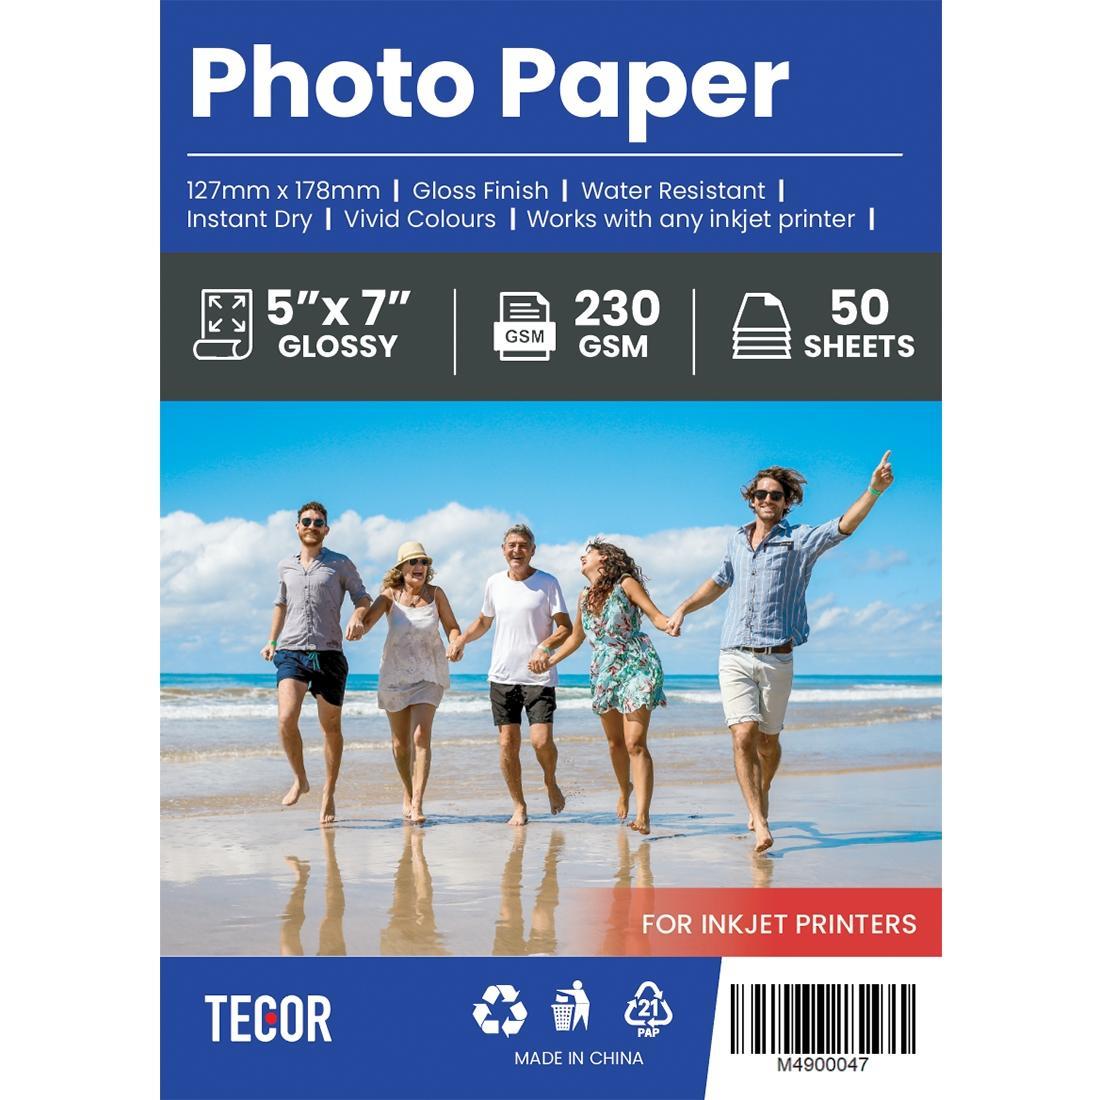 Glossy Cast Coated Photo Paper 230GSM 5 x 7 inches for Inkjet Printers - 50 sheets